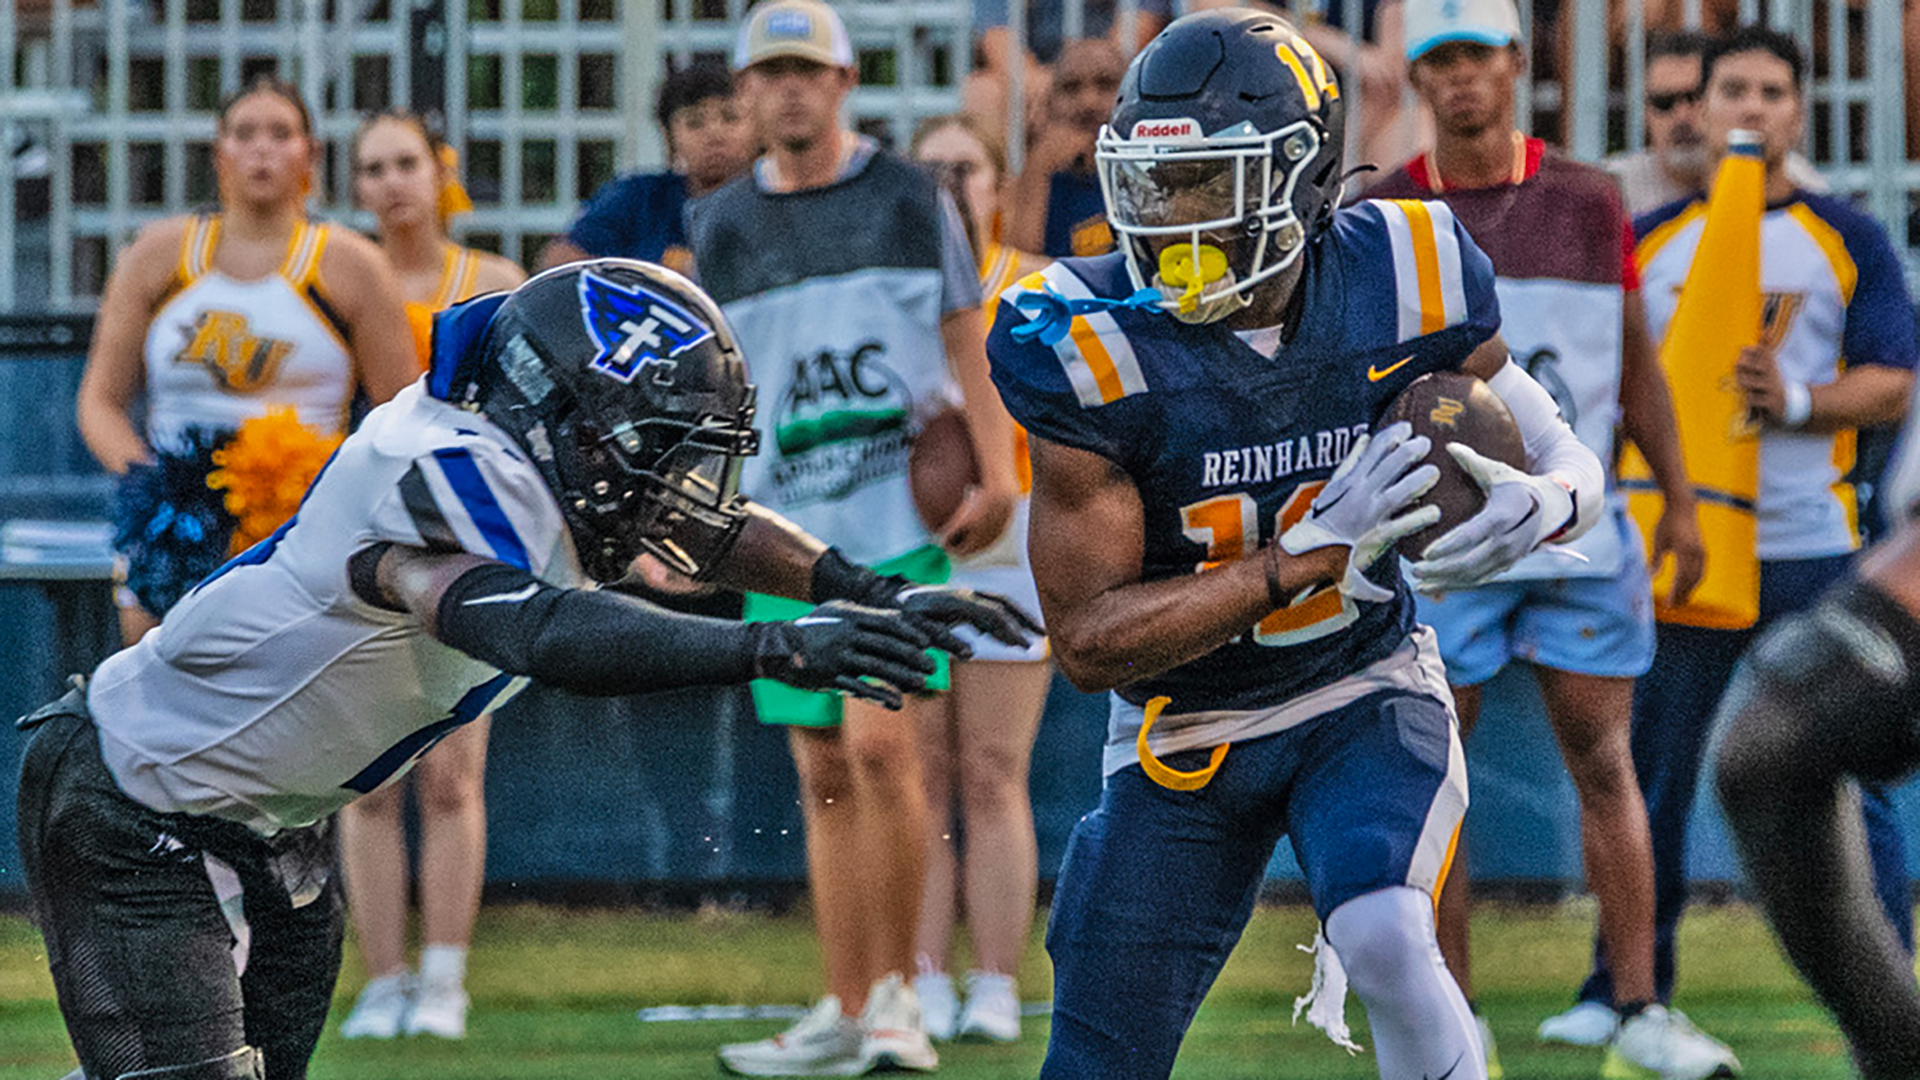 Reinhardt Falls in First Round of Football Championship Series